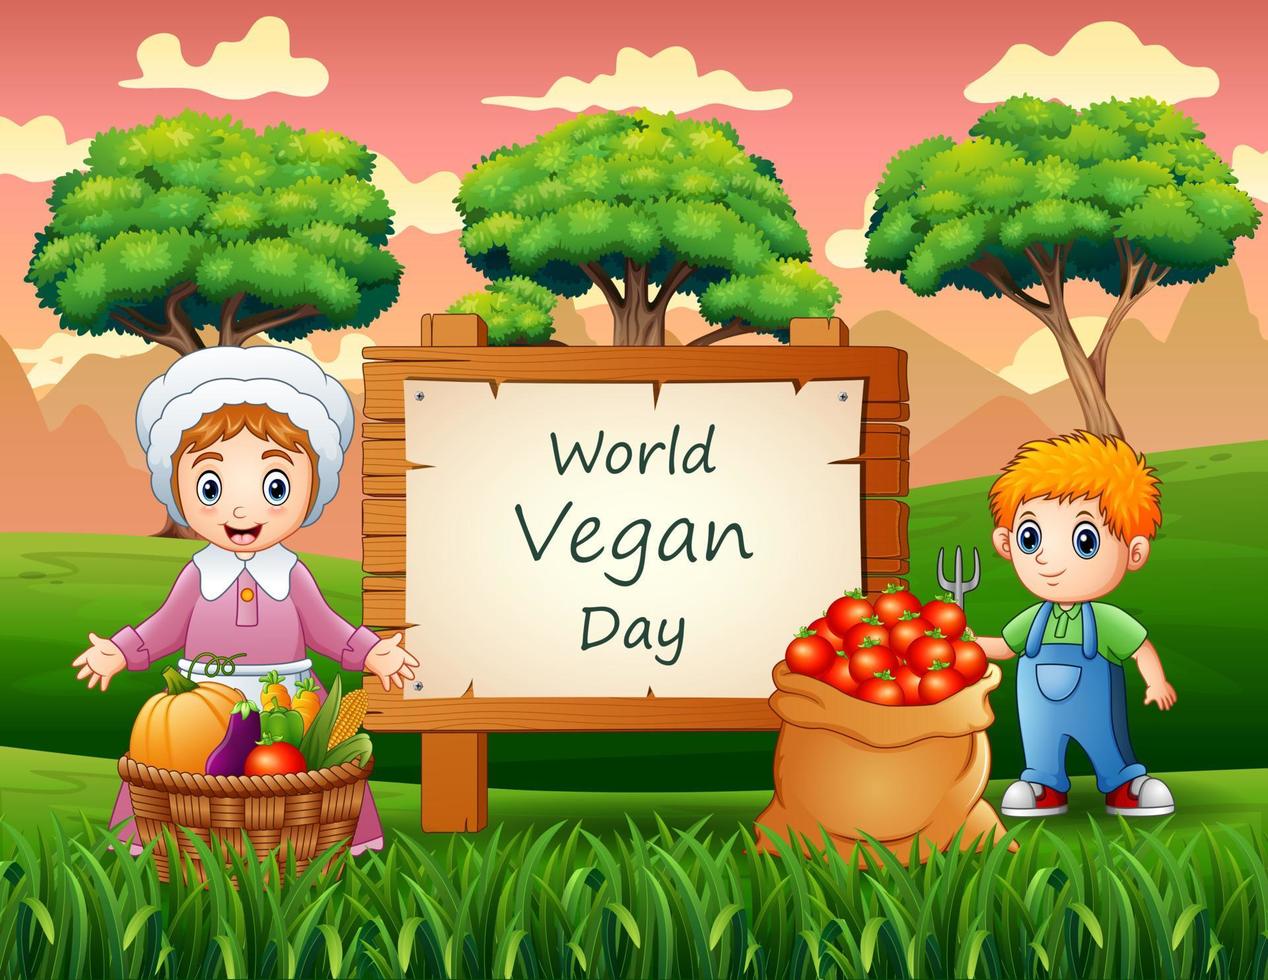 World Vegan Day on sign with vegetables and young farmers vector